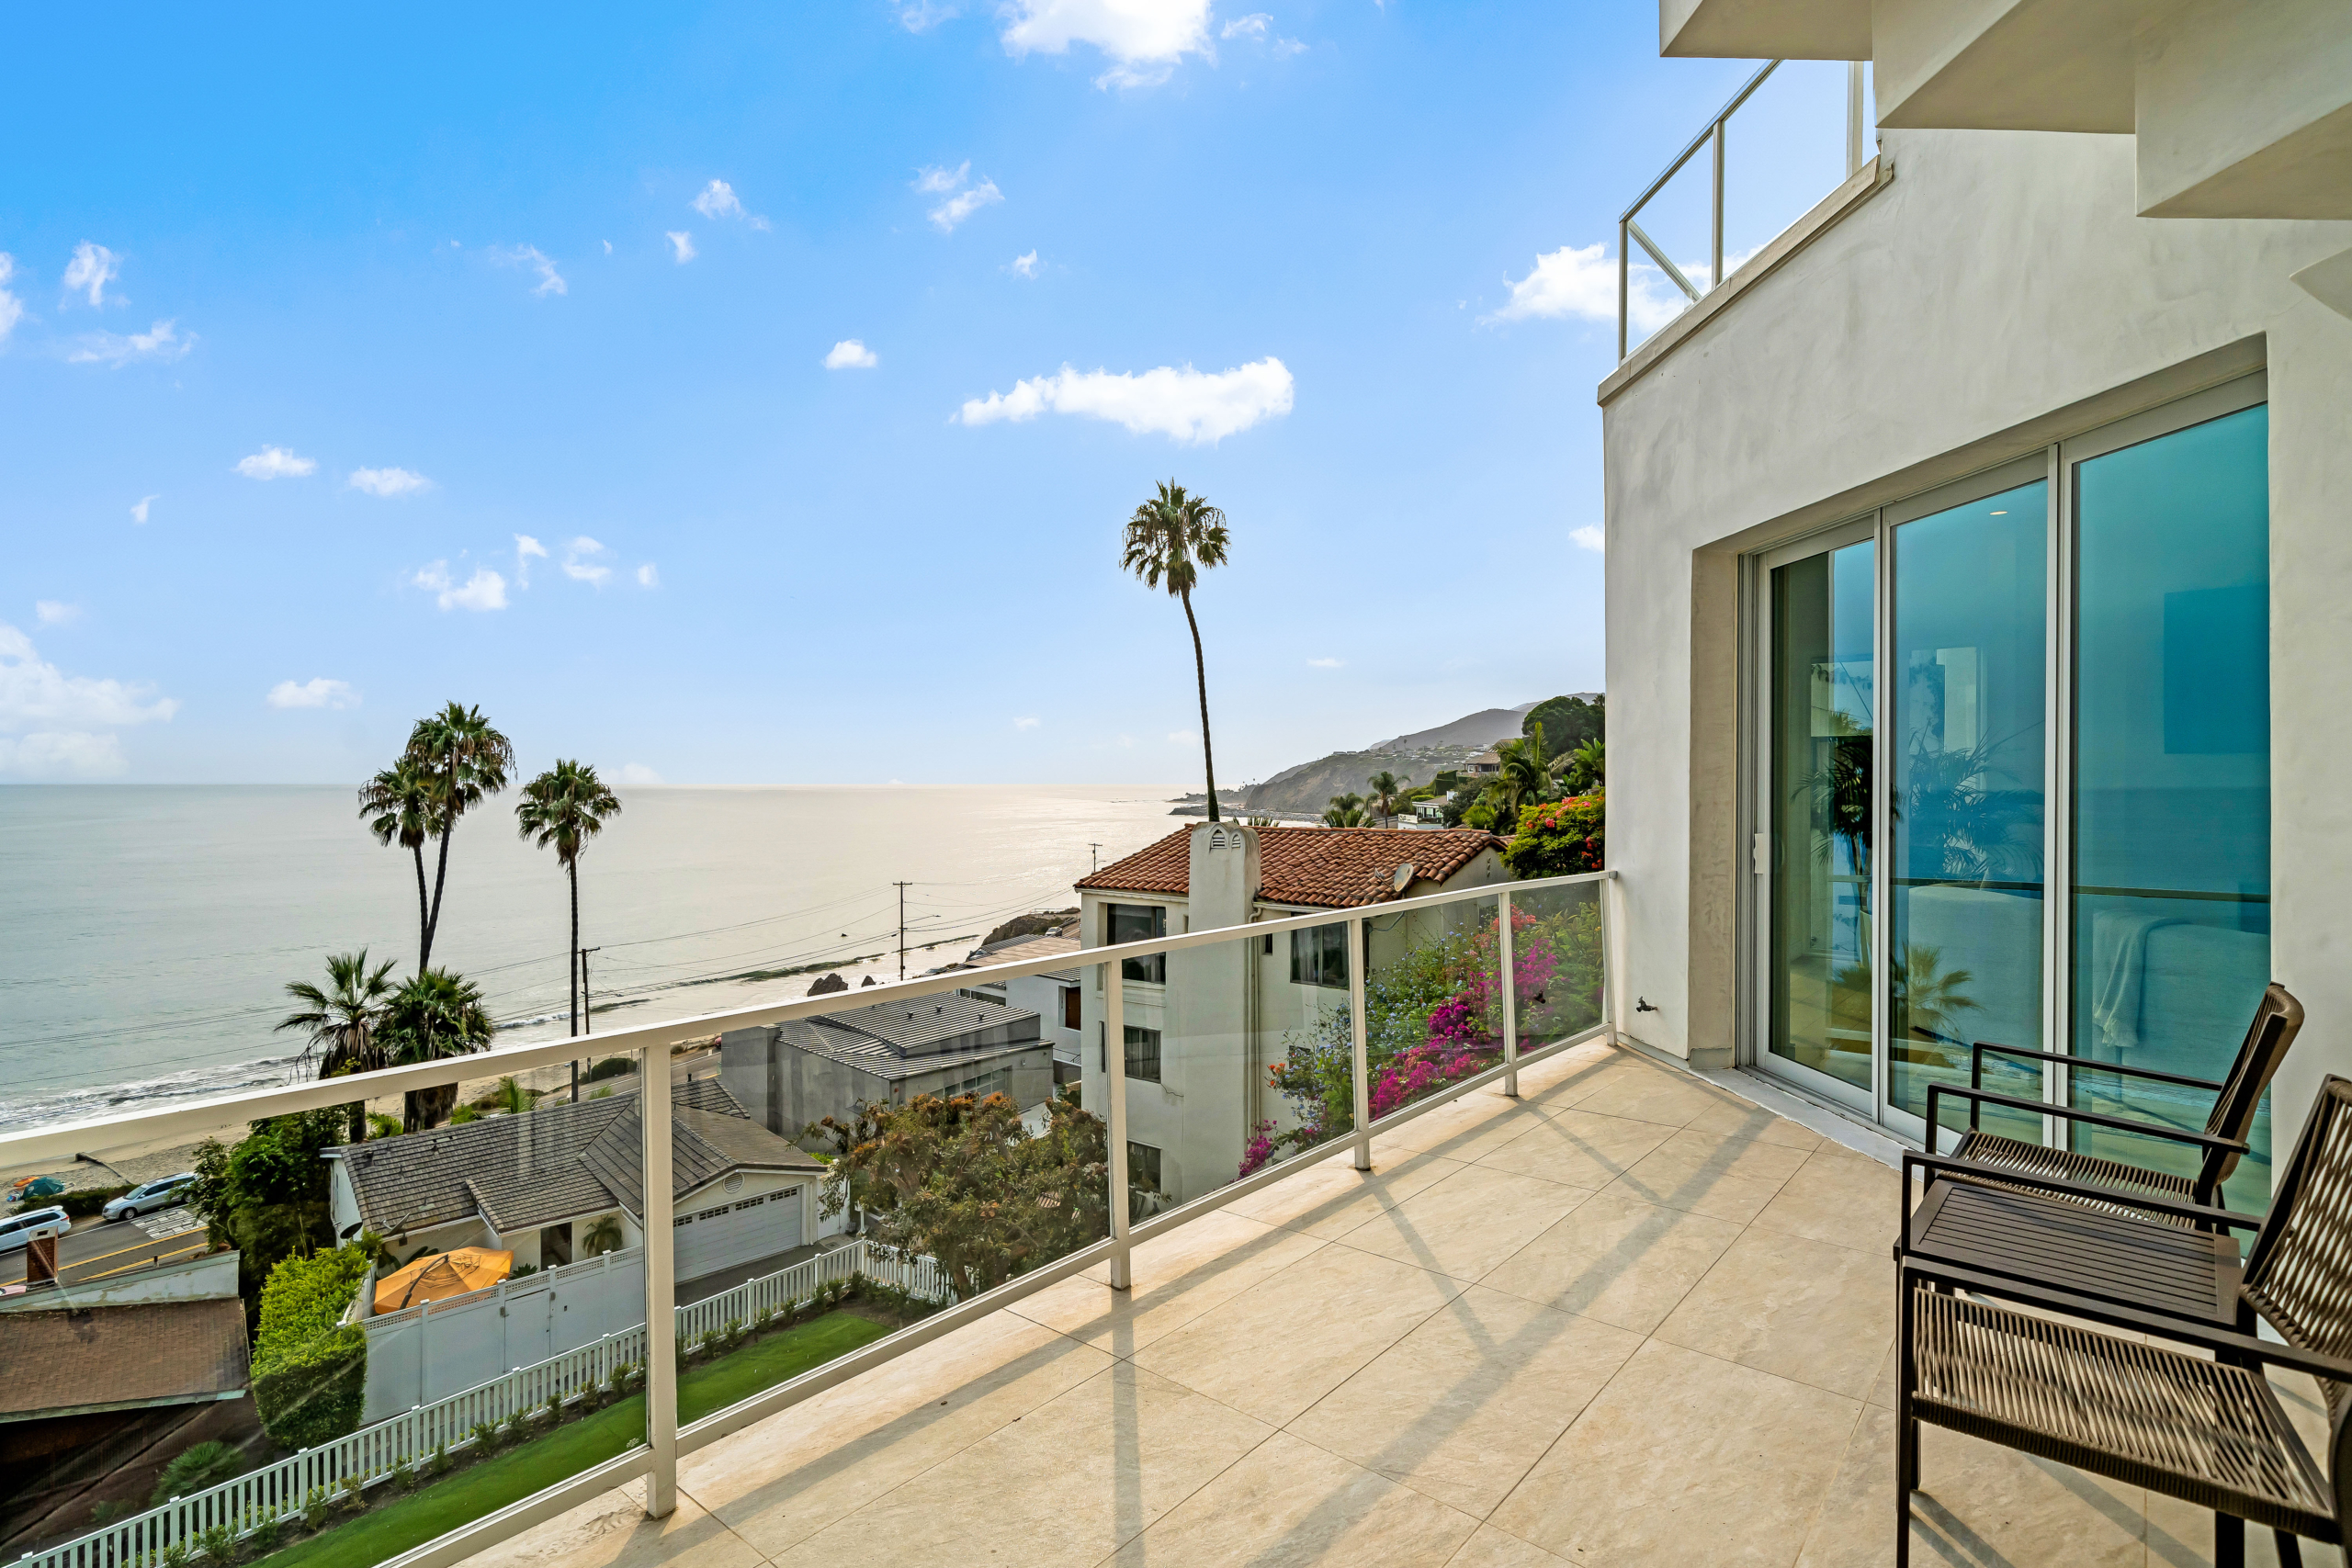 balcony with wide view of neighboring homes below and view of the ocean